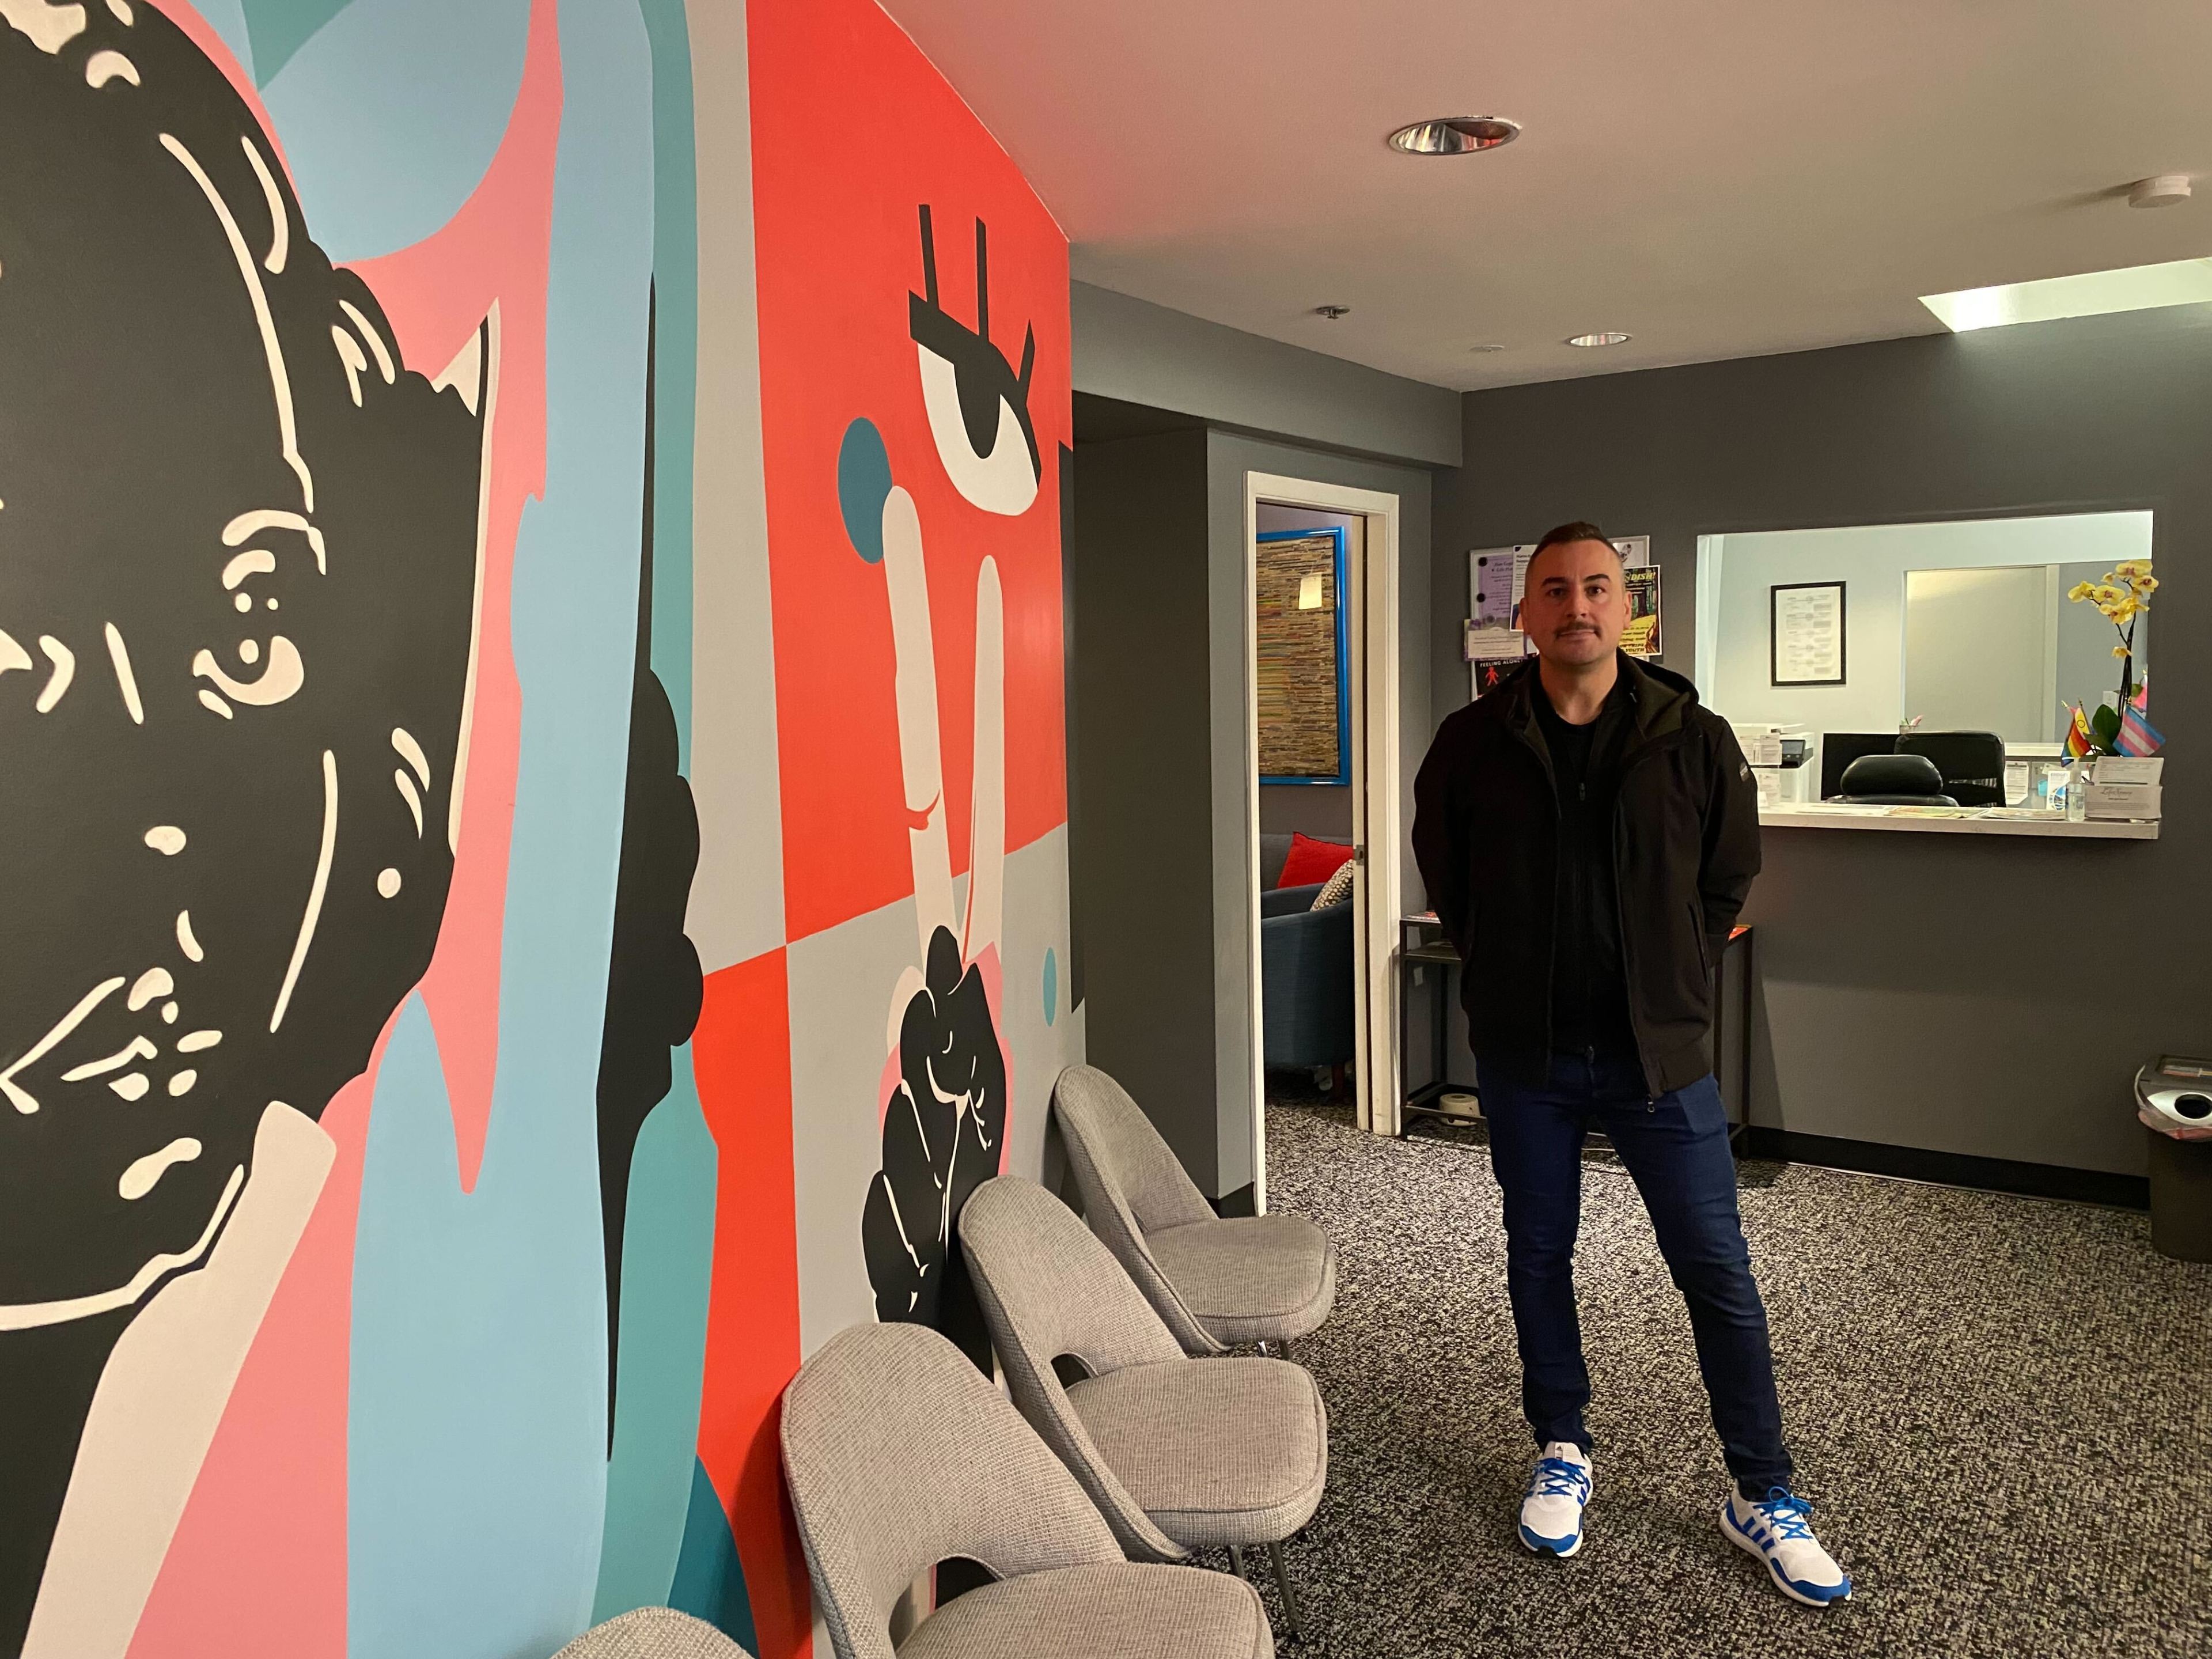 A man stands in an office with large colorful abstract wall art, wearing a black jacket, blue jeans, and white shoes.